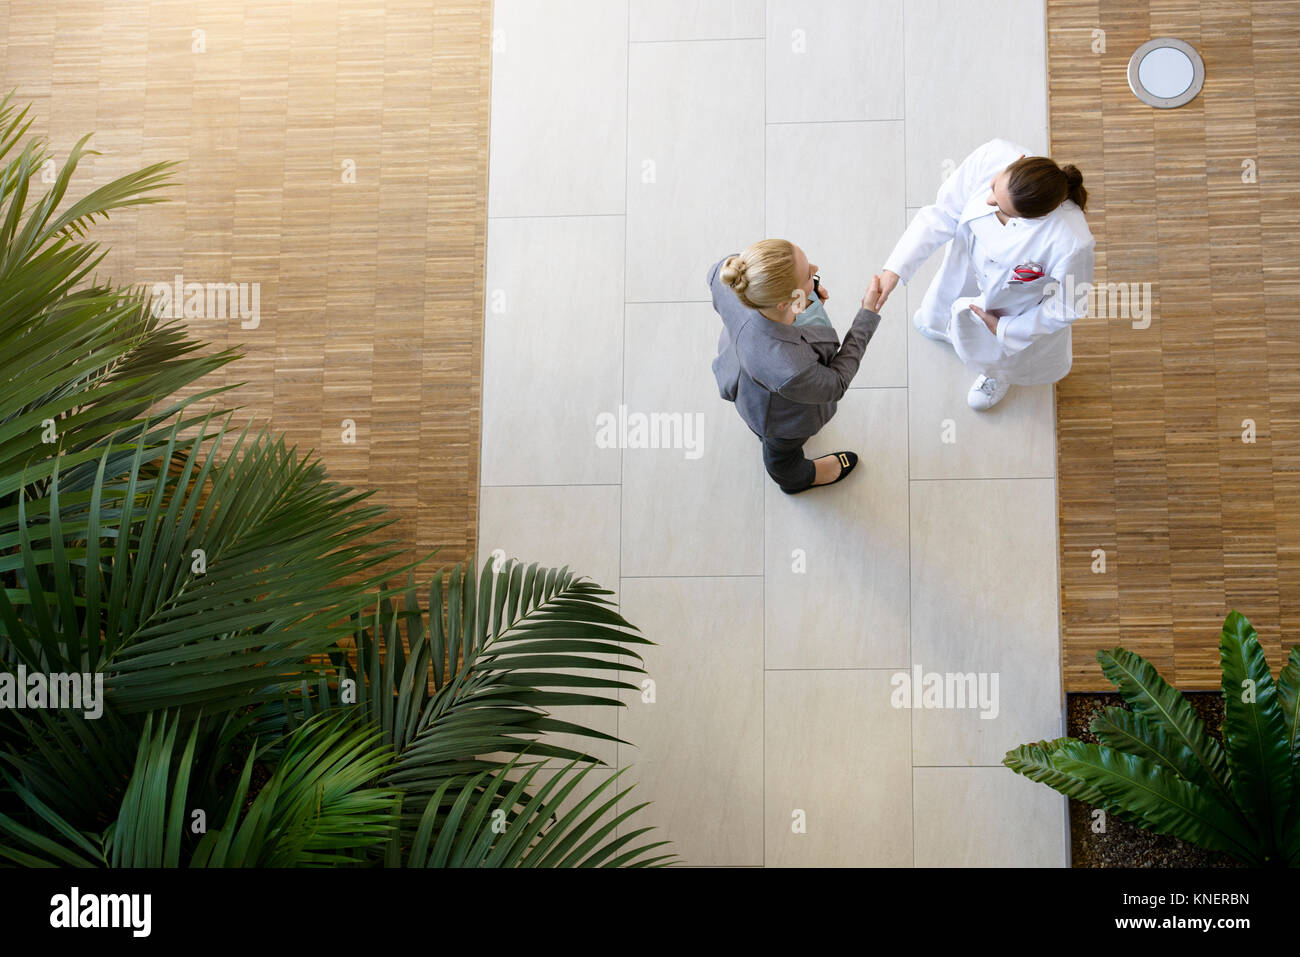 Female doctor and young woman, shaking hands, elevated view Stock Photo